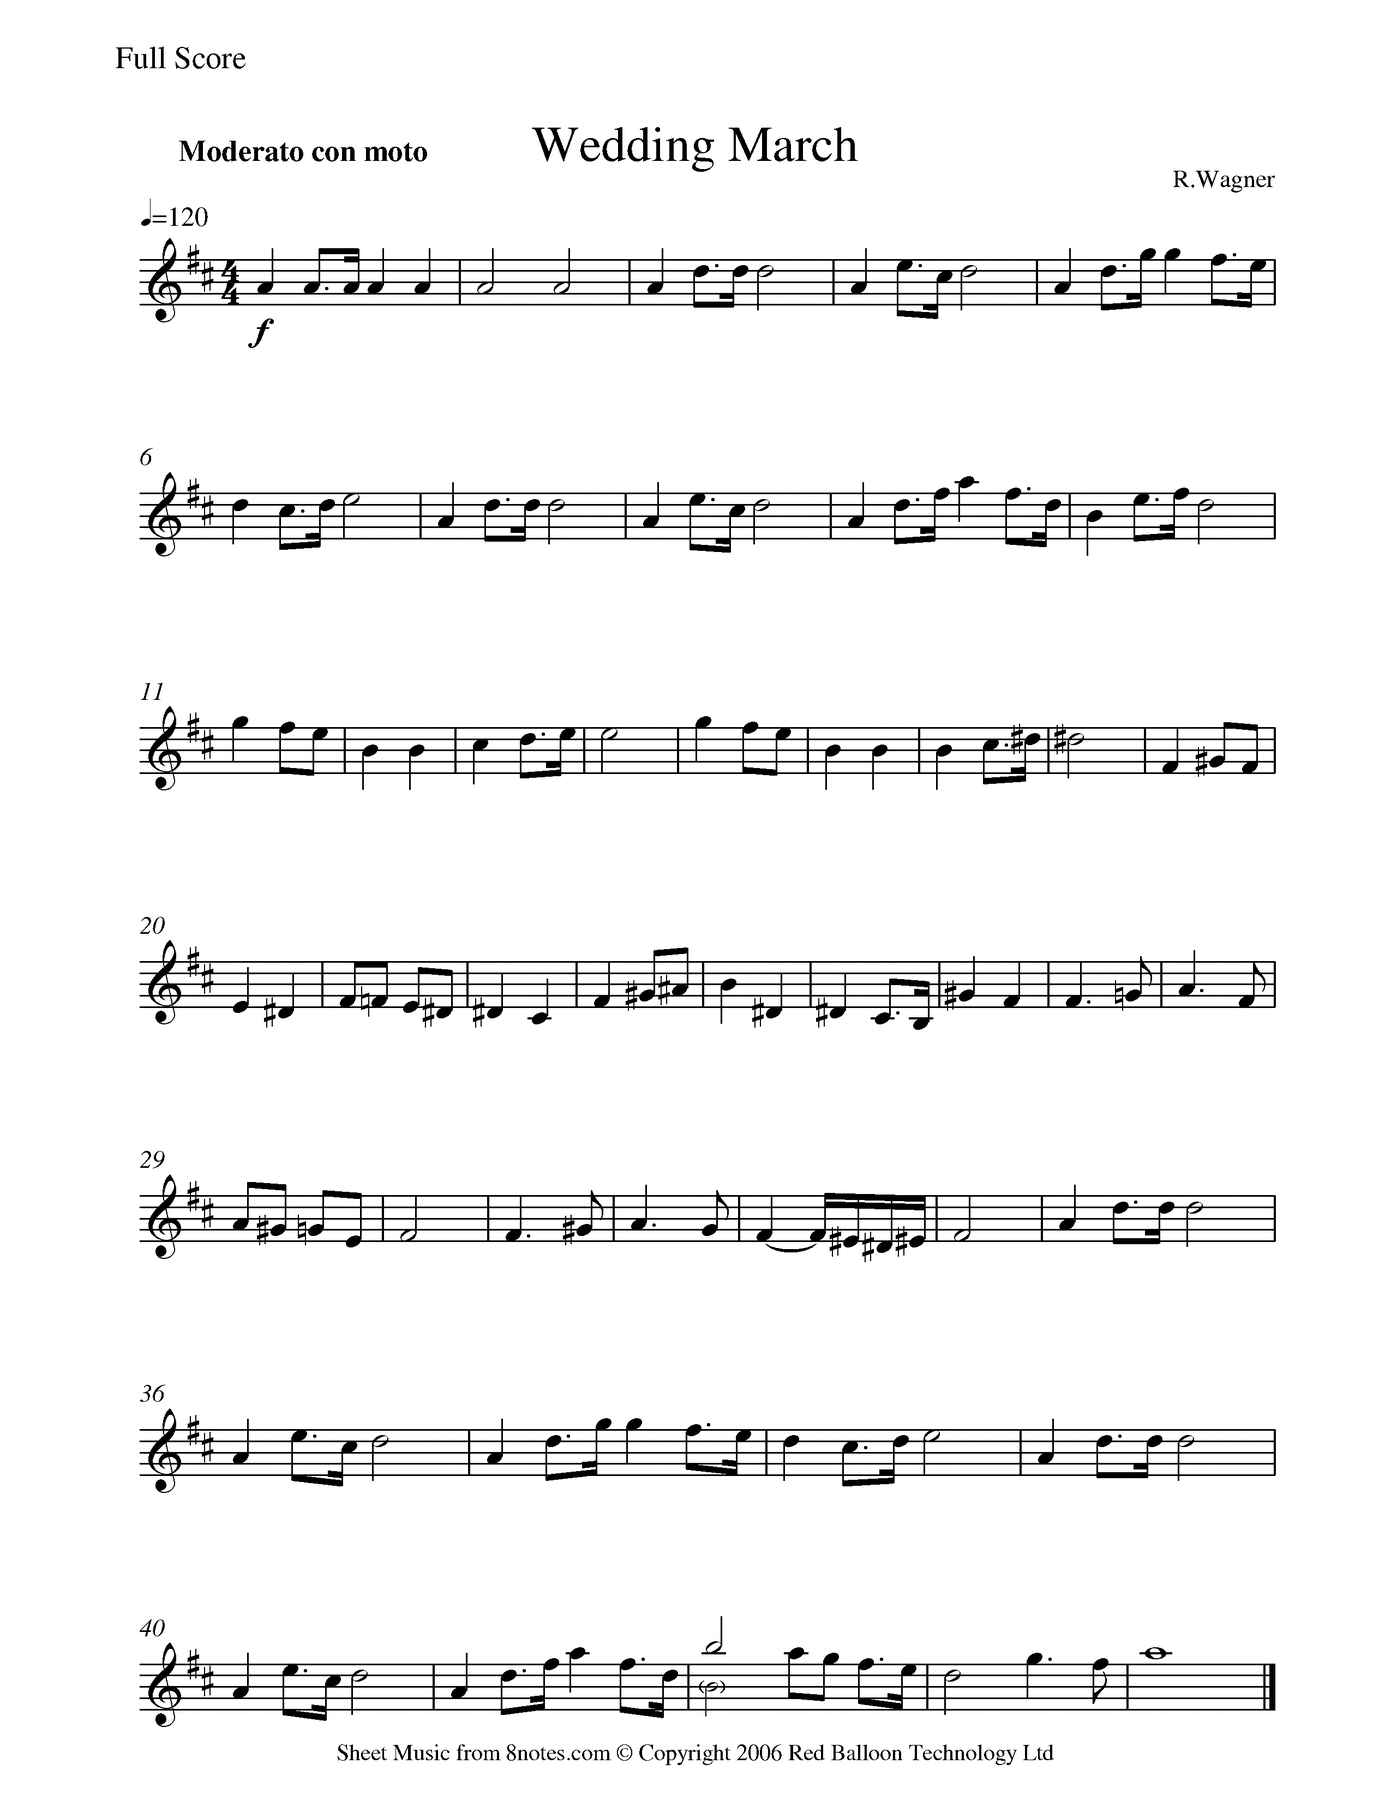 Free Accordion Wedding Sheet Music Pdf ~ 20 collection of ideas about